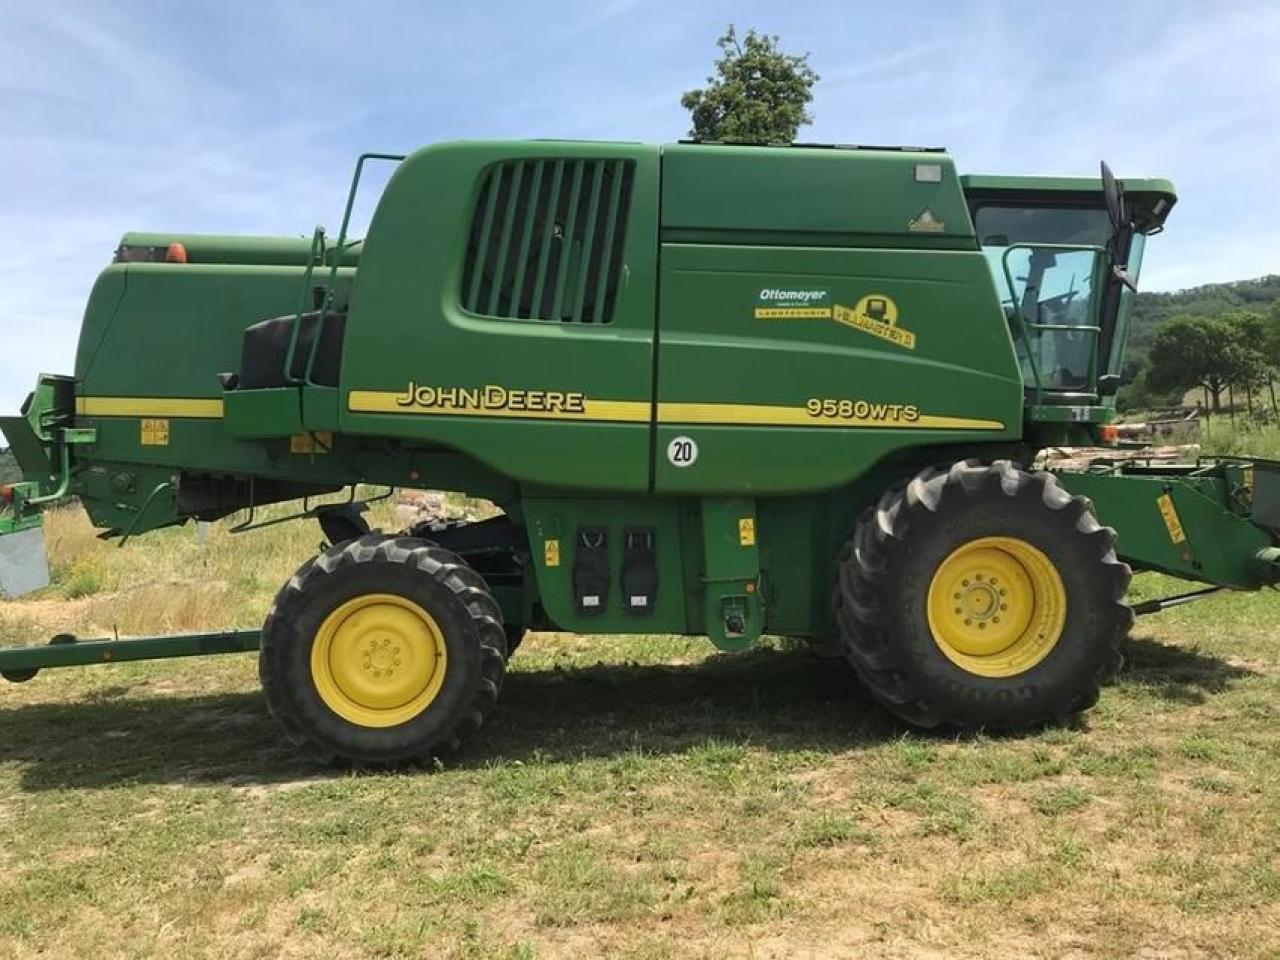 Fichiers Tuning Haute Qualité John Deere Tractor WTS 9580 8.1 V6 251hp